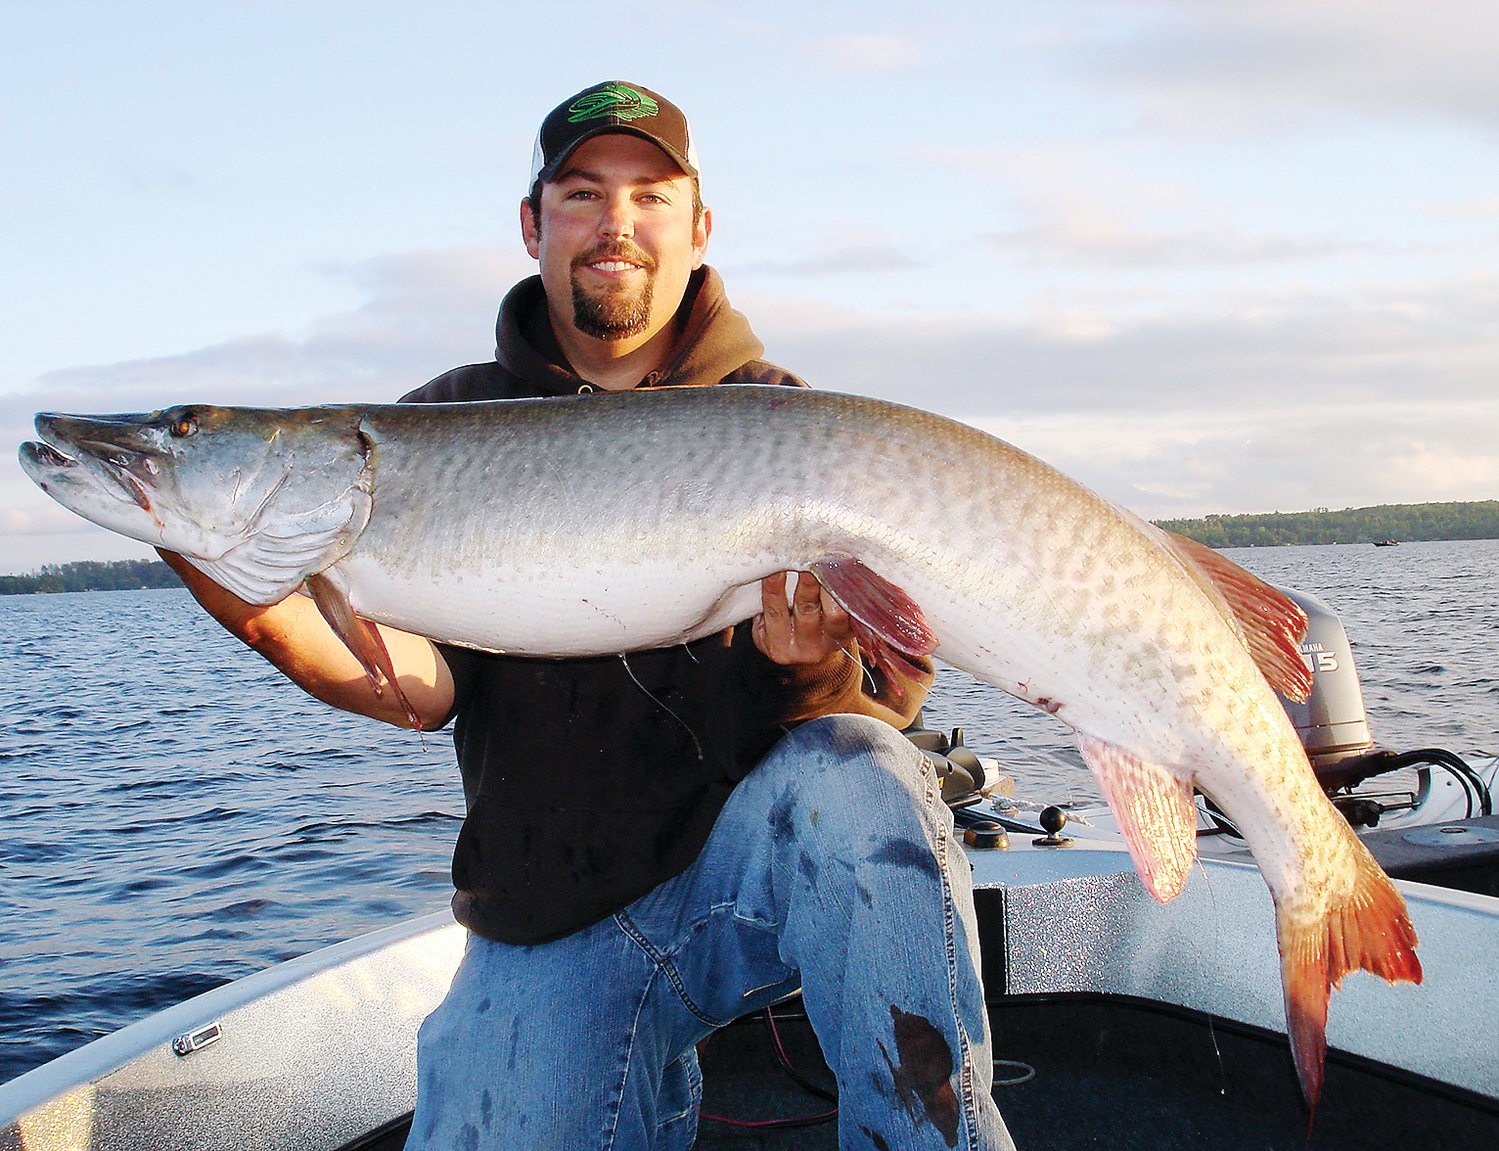 Fishing guide Matt Snyder with a 54-inch musky he caught on Vermilion nearly ten years ago. He’s concerned about changes he’s seen in the number and behavior of muskies on the lake.